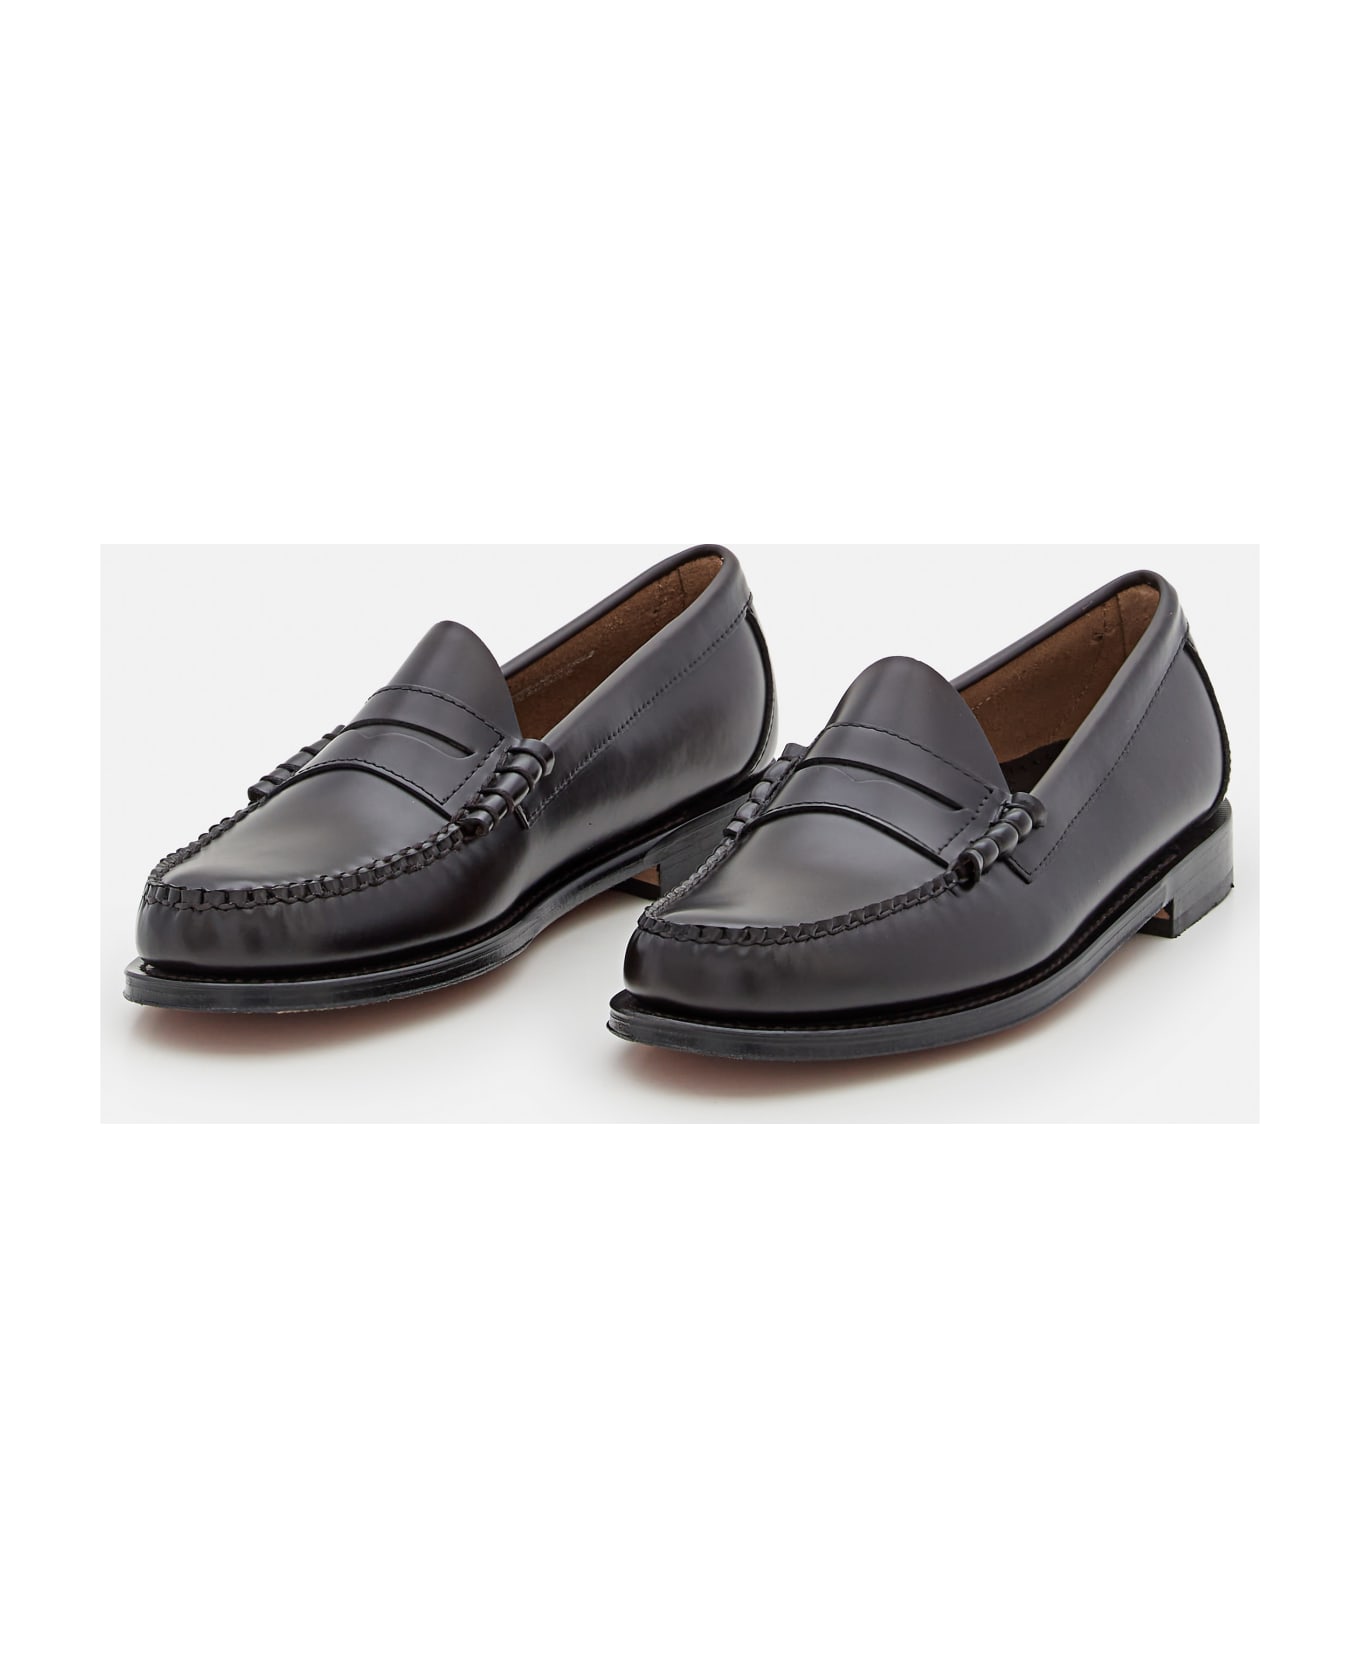 G.H.Bass & Co. Loafers - Brown